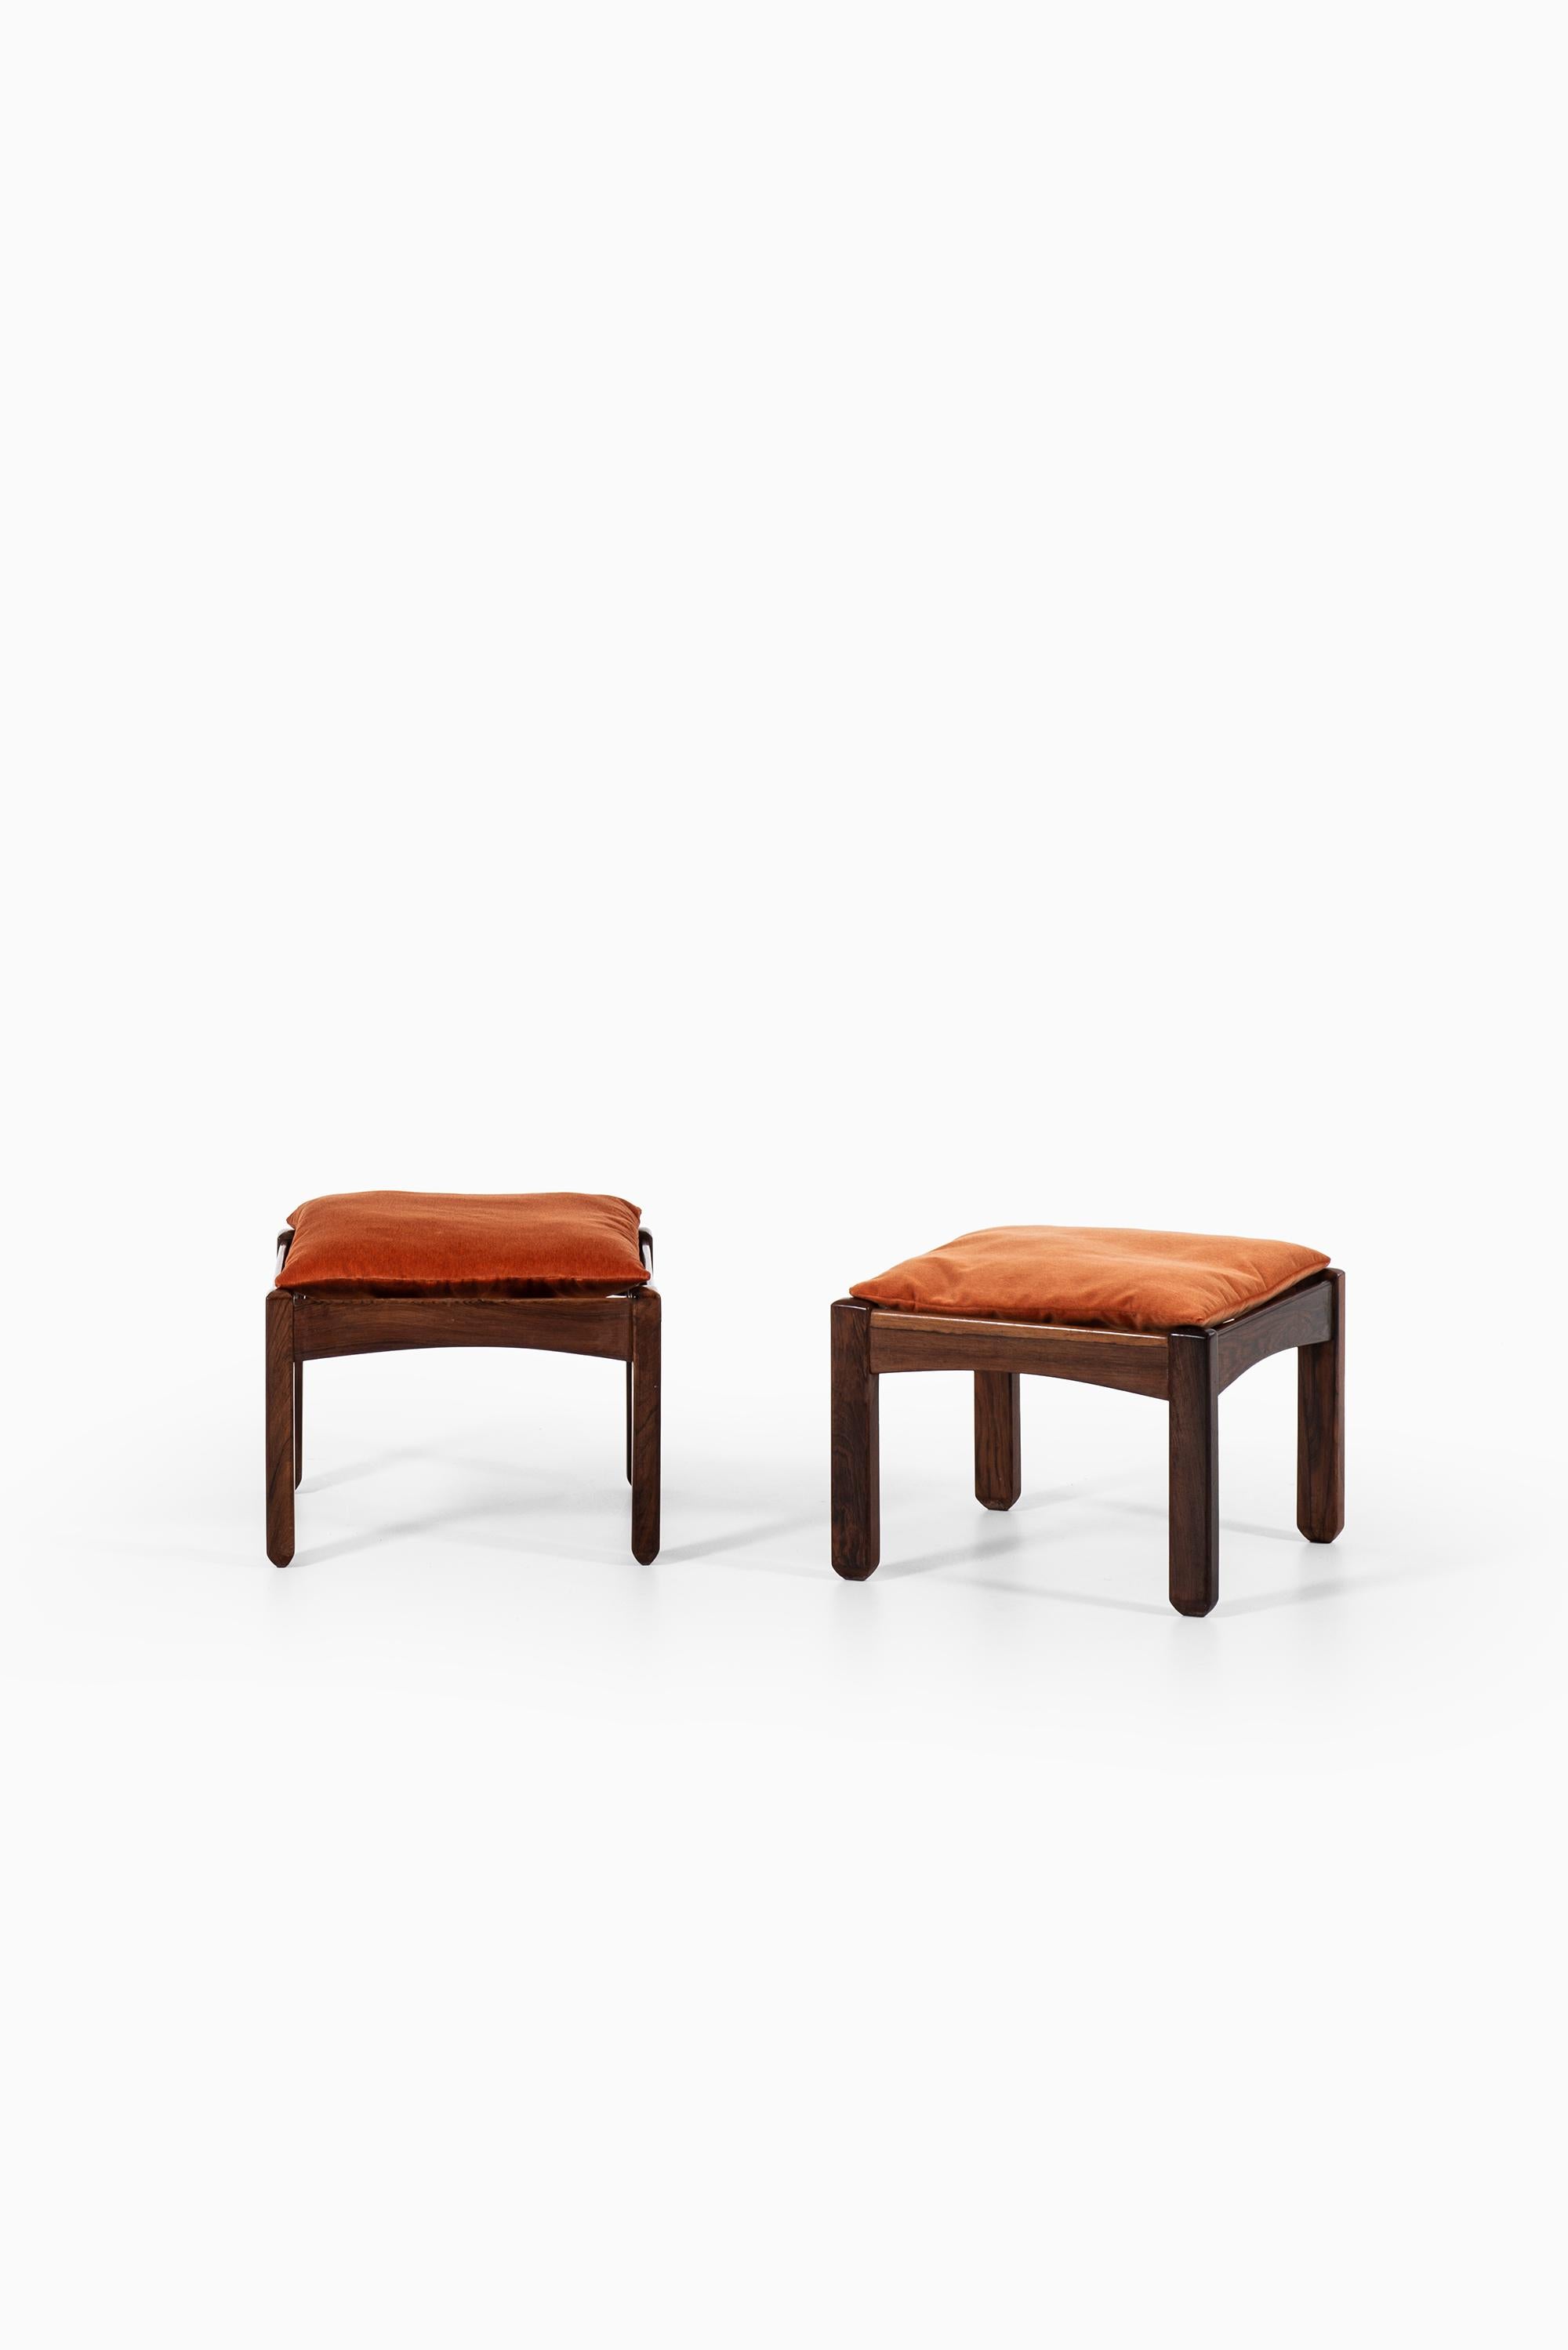 Mid-20th Century Pair of Stools in Rosewood and Velvet Probably Produced in Brazil